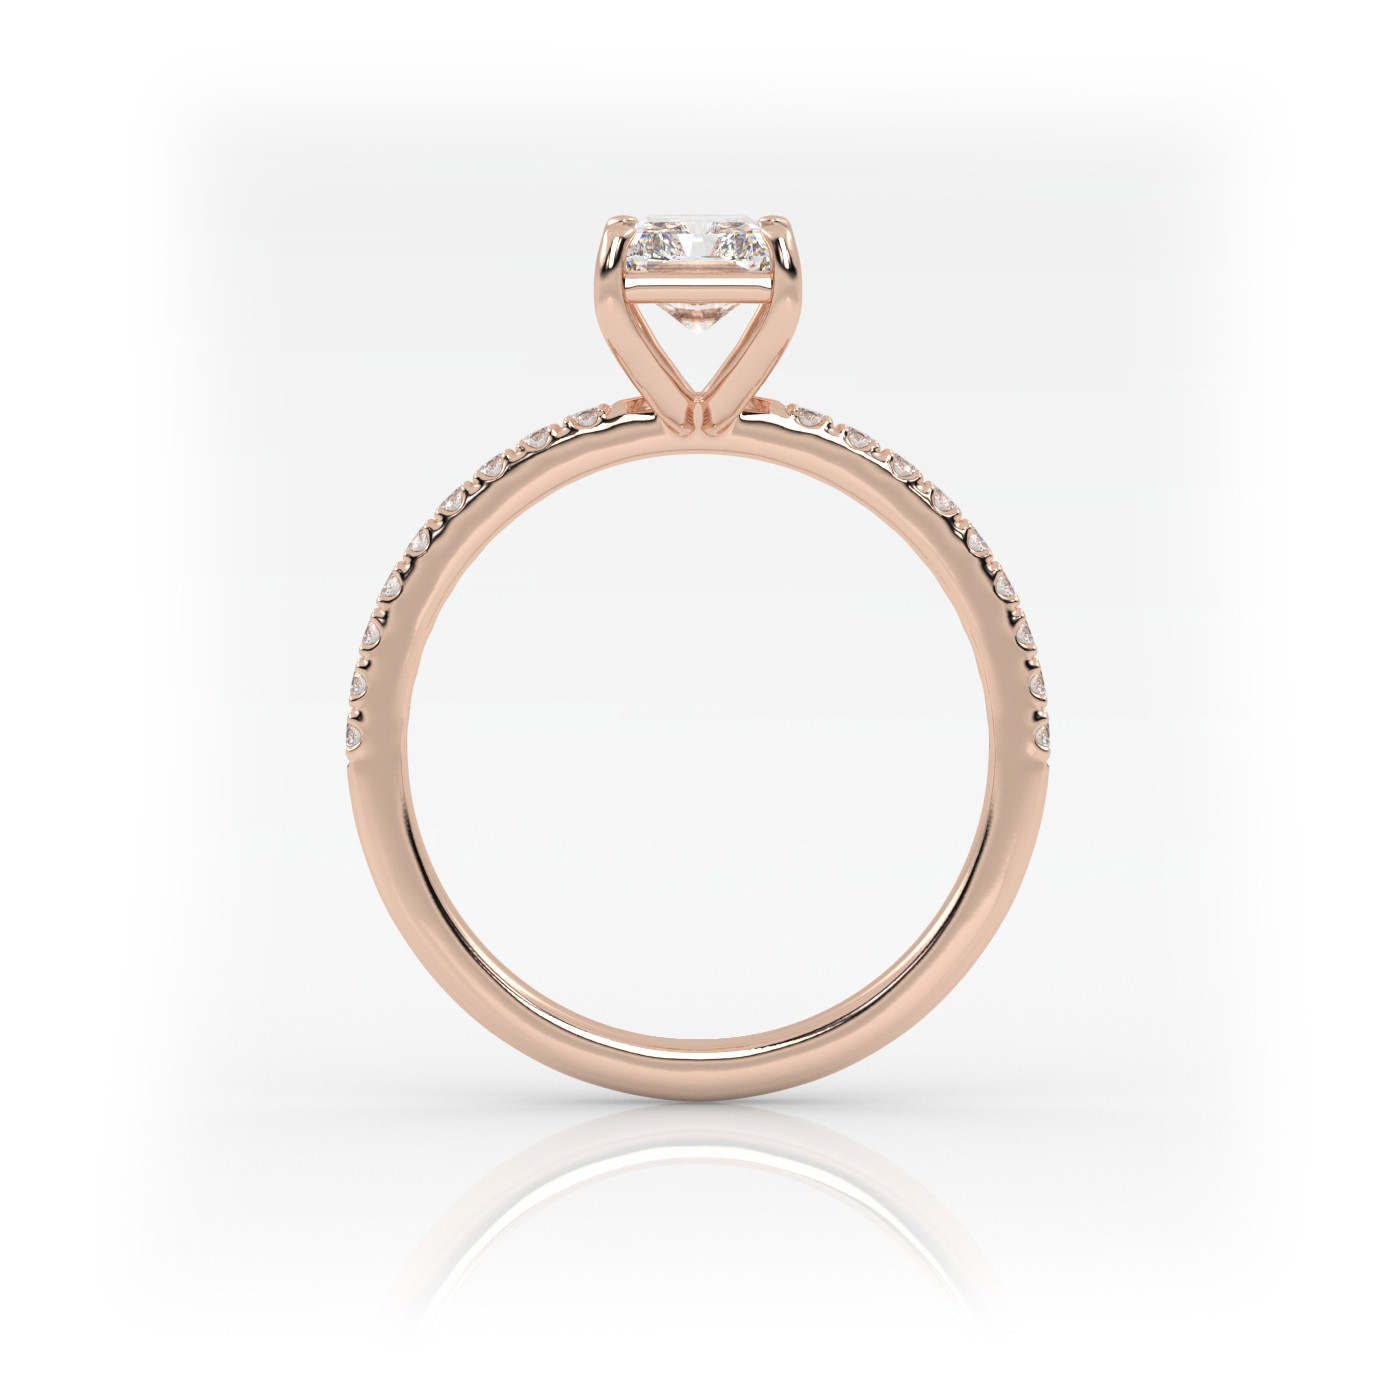 18K ROSE GOLD Radiant Diamond Cut Solitaire Engagement Ring with Pave Band.